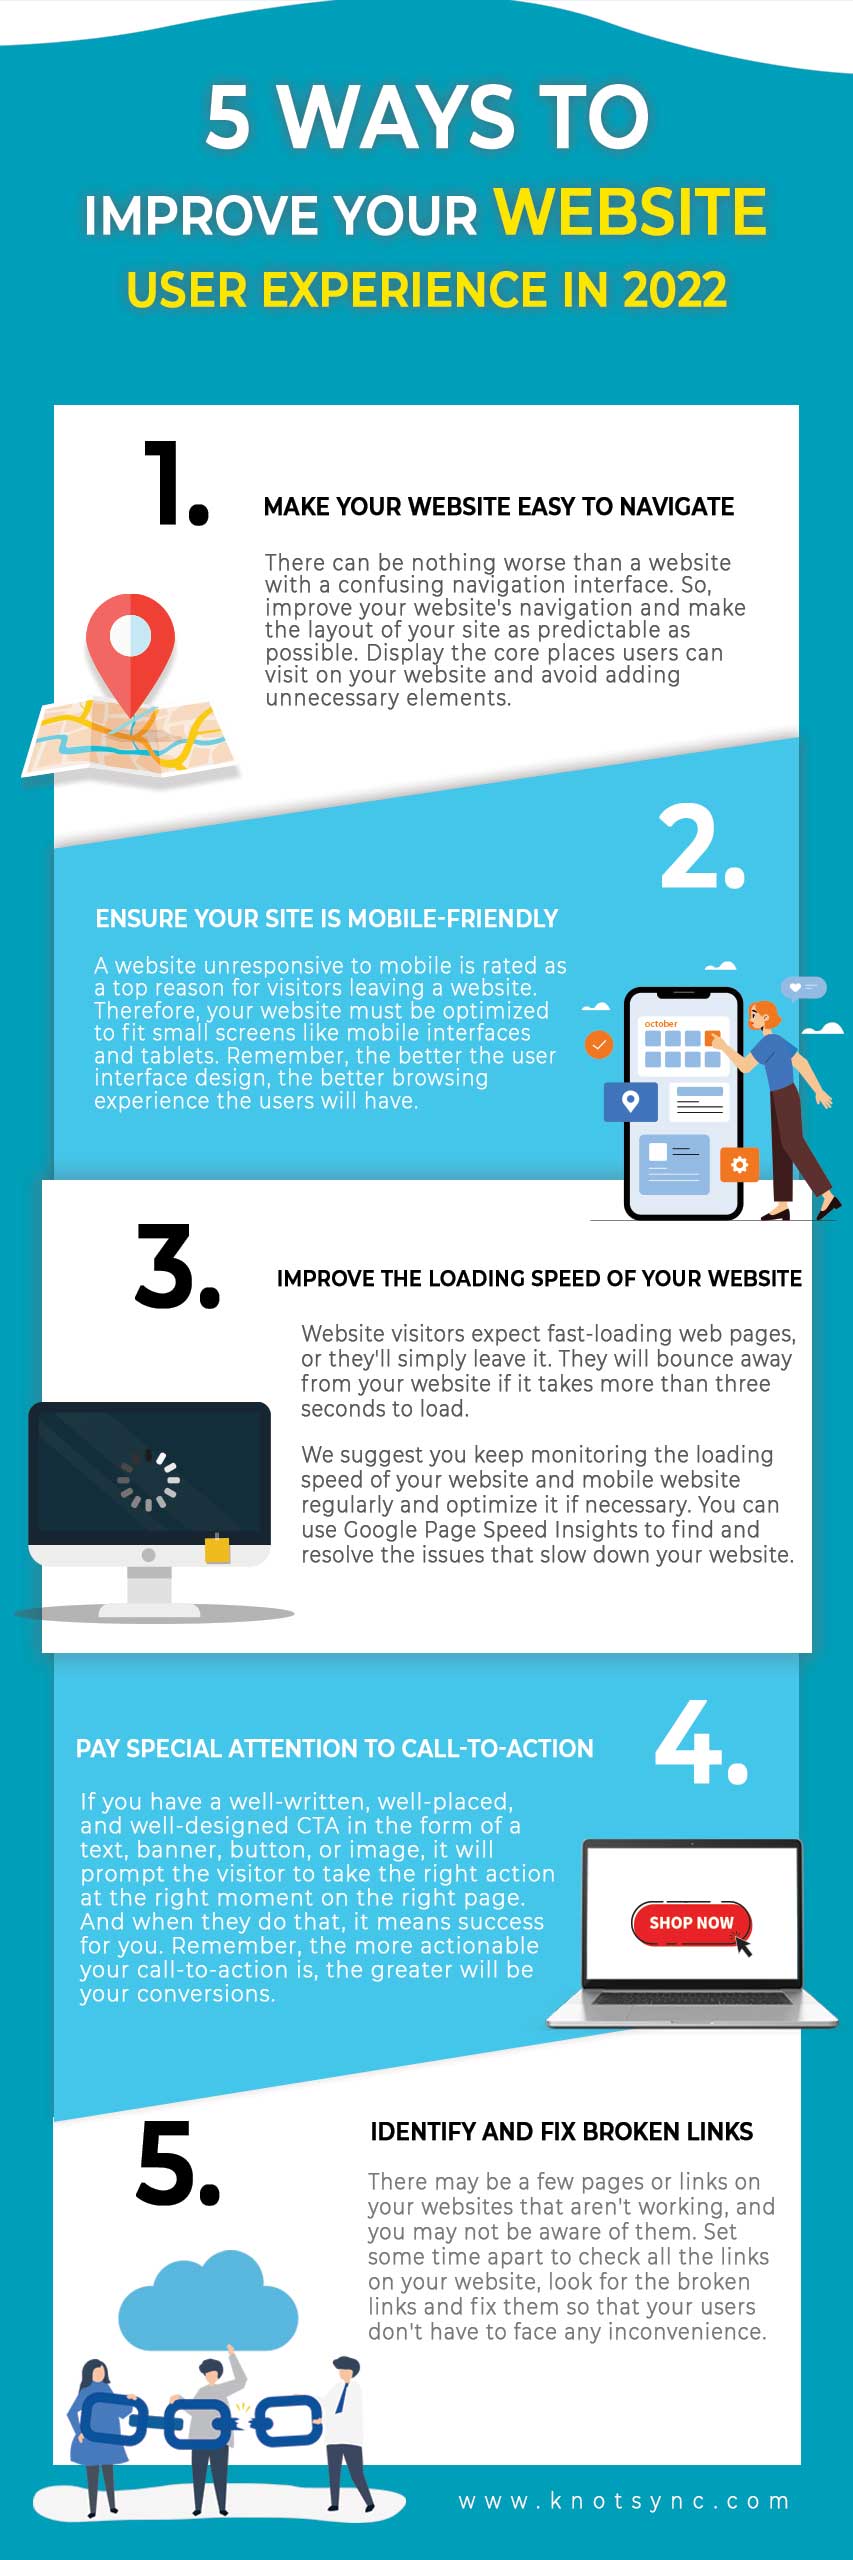 5 Ways to Improve Your Website User Experience in 2022 